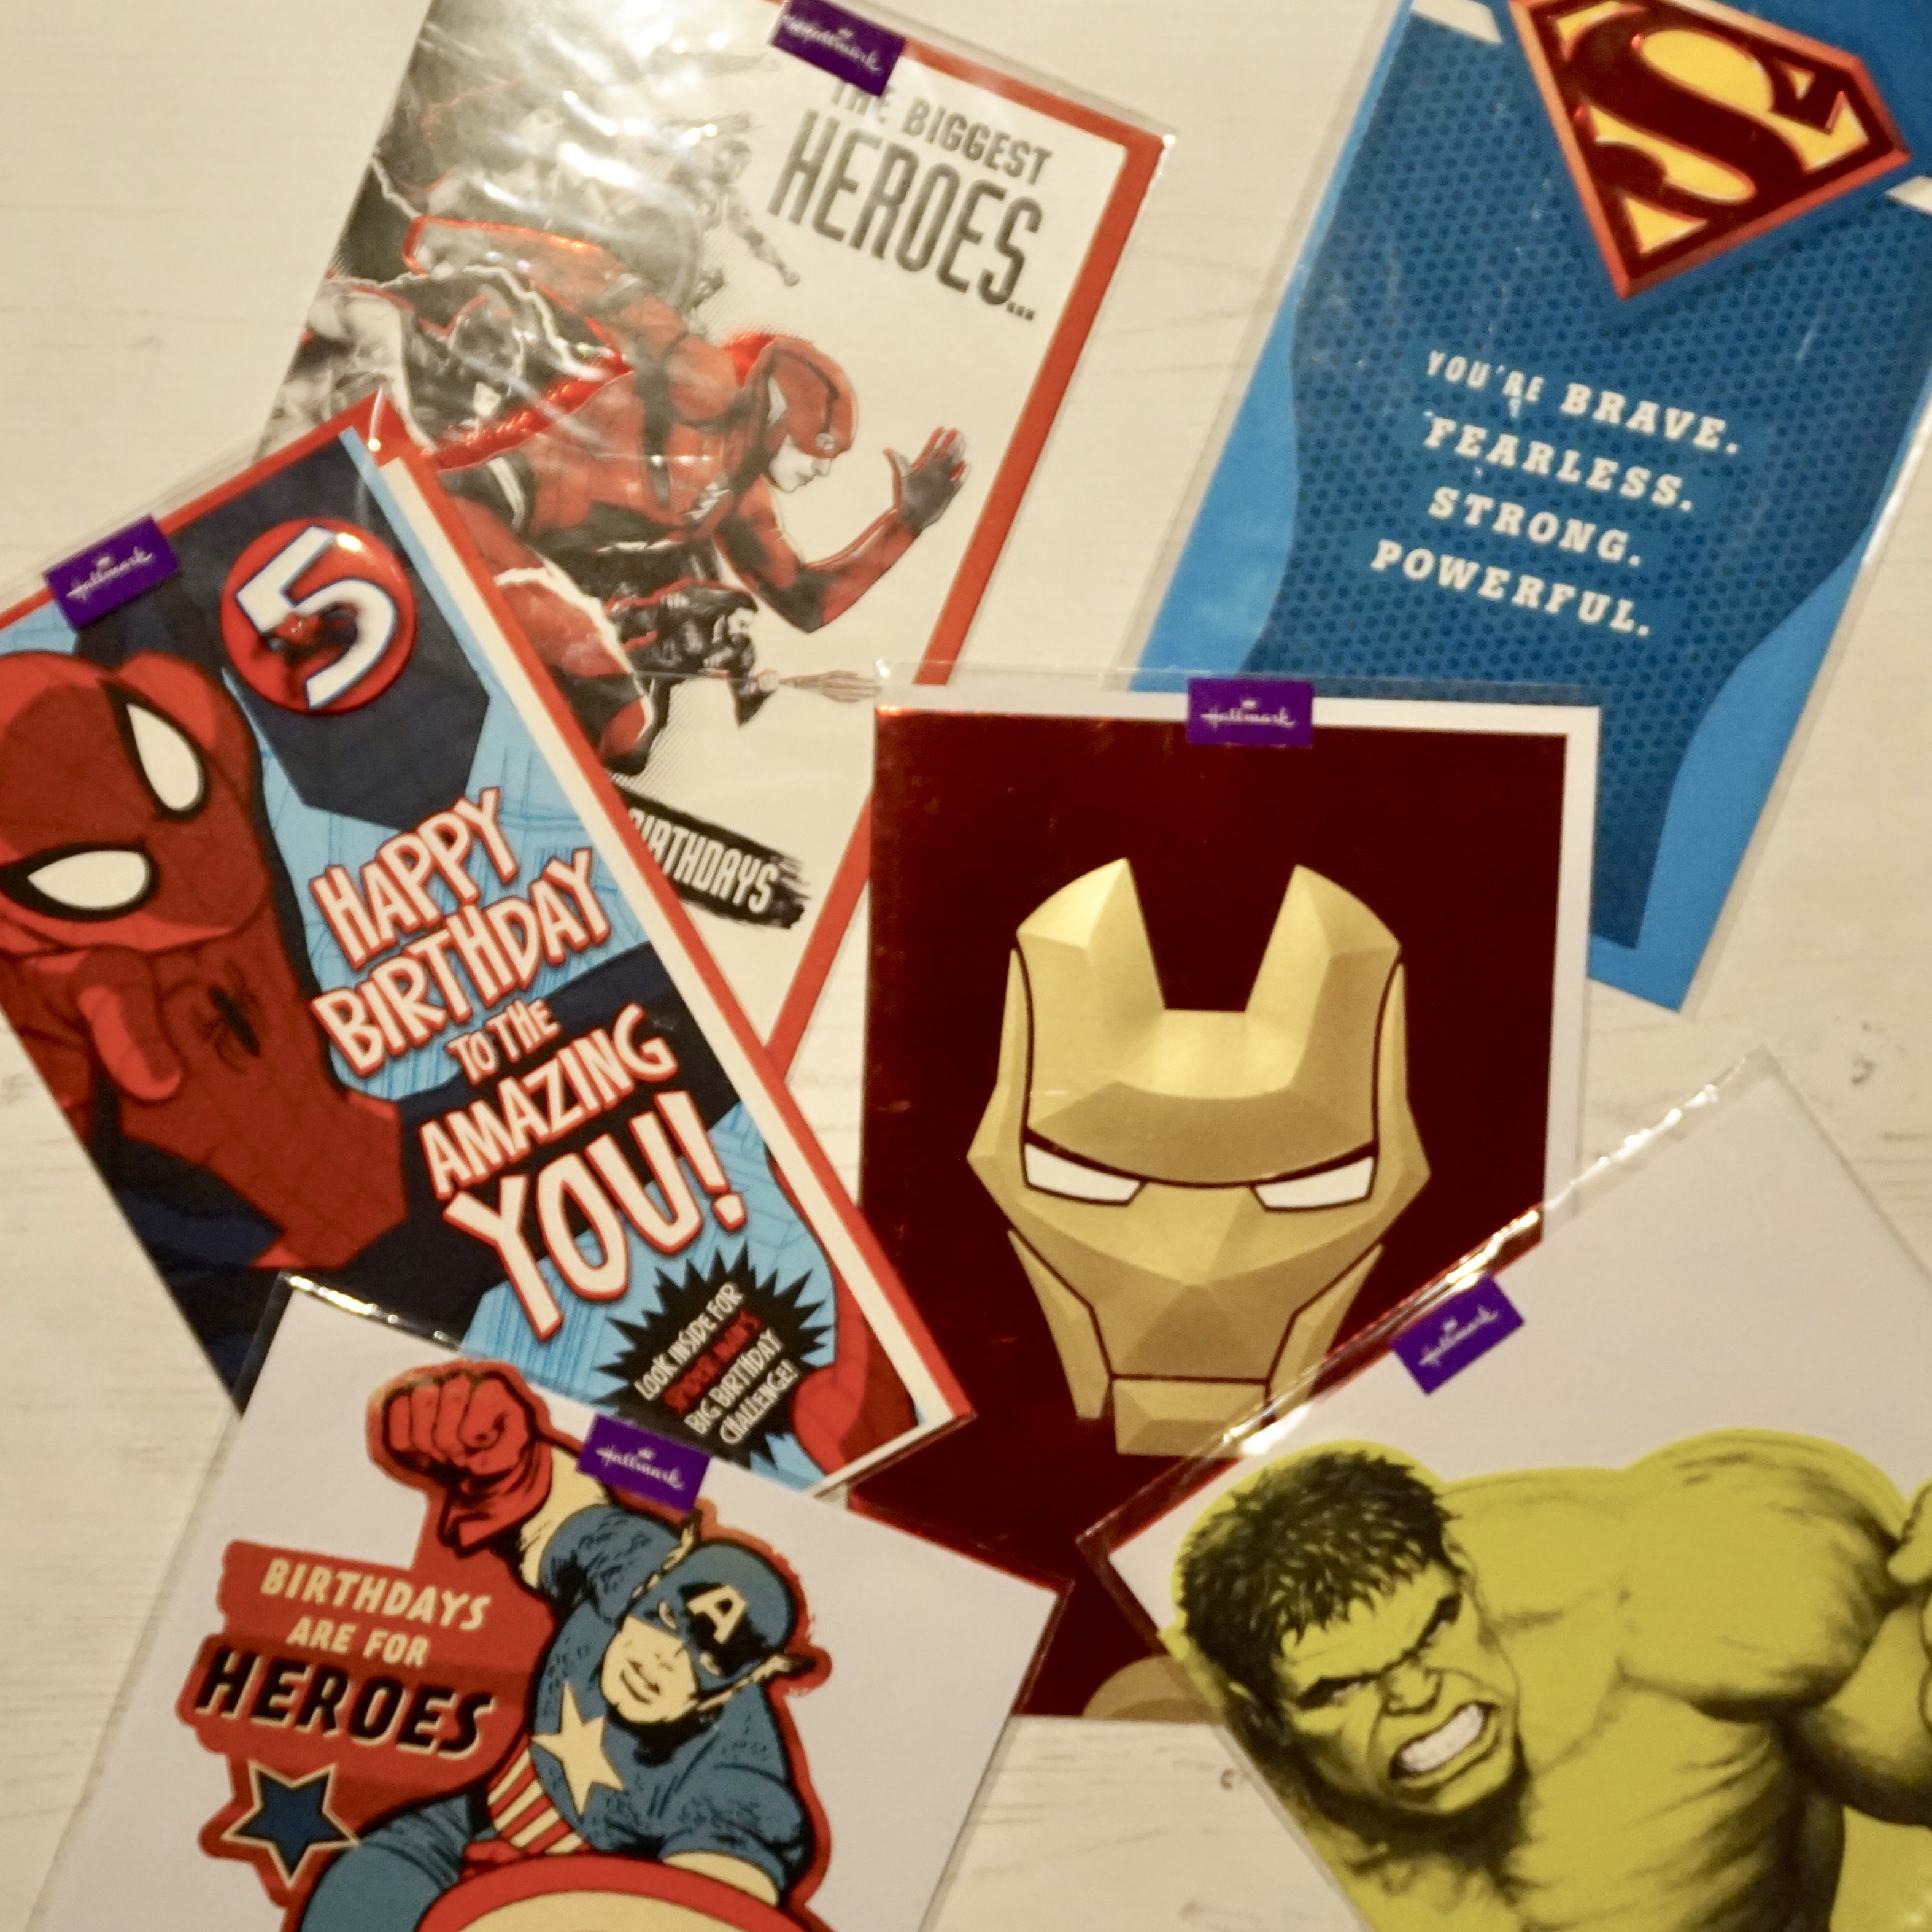 Superhero Obsessed 5th Birthday Gift Guide